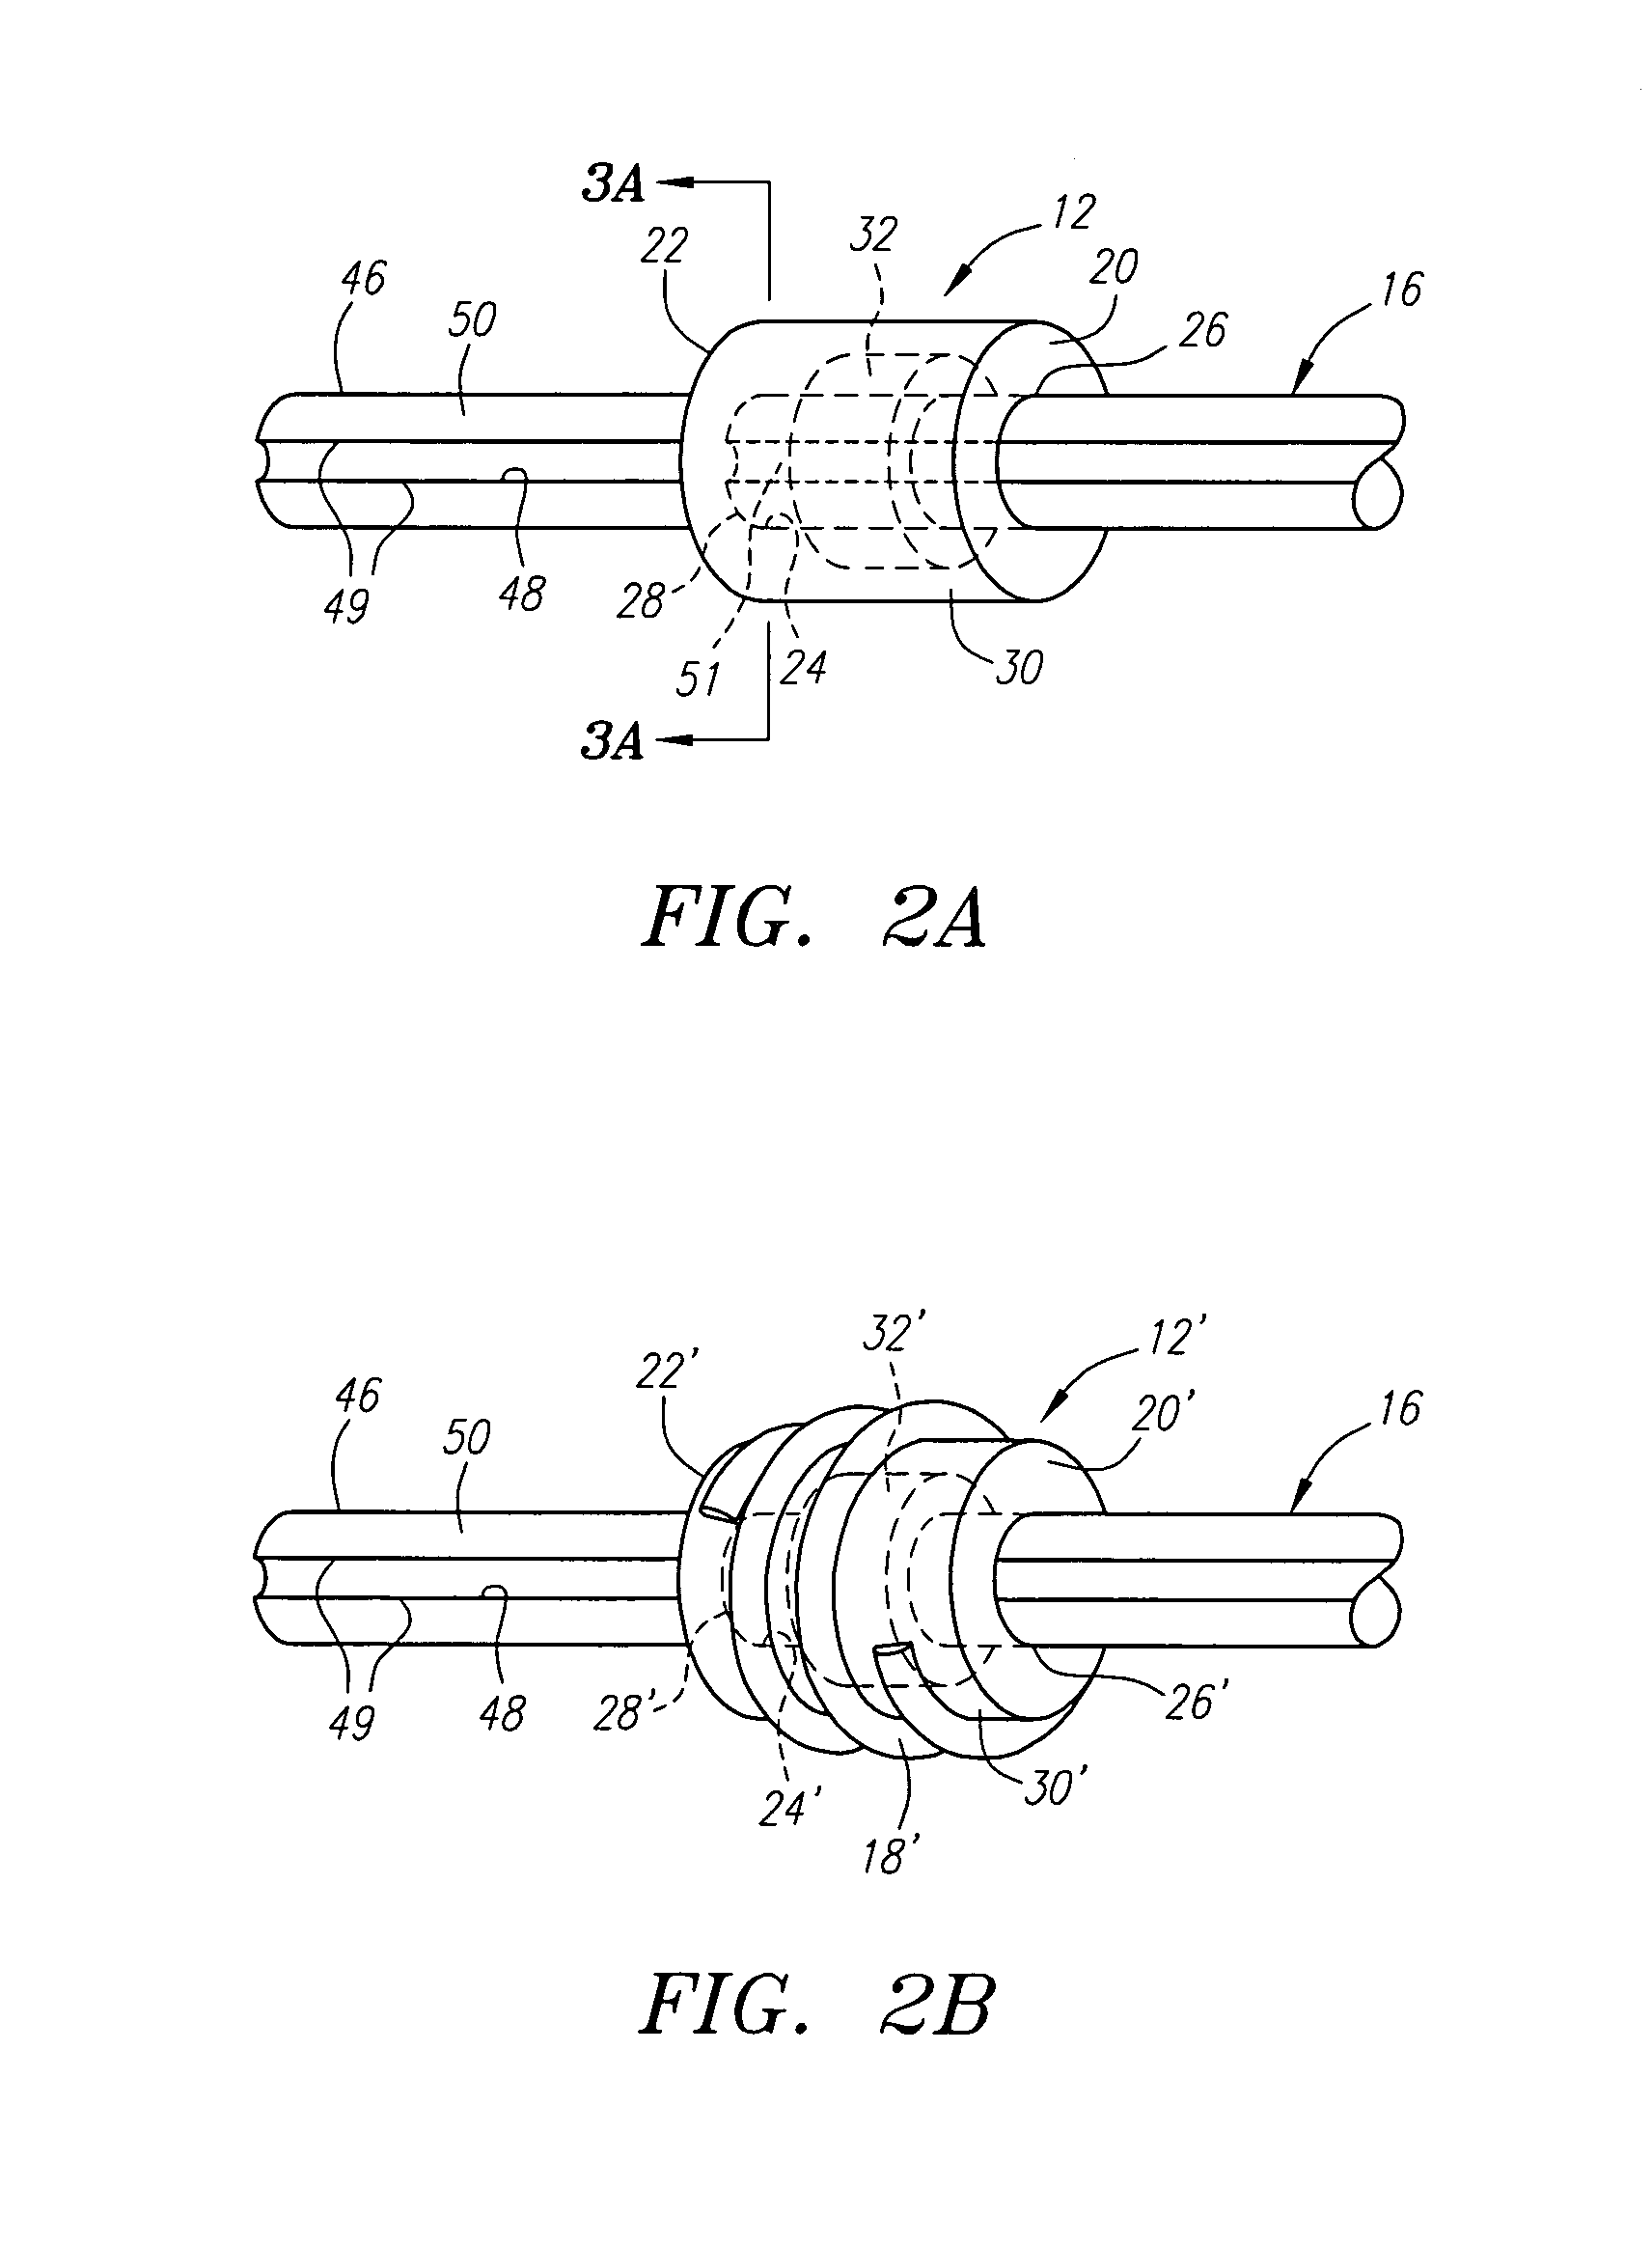 Apparatus and methods for sealing vascular punctures